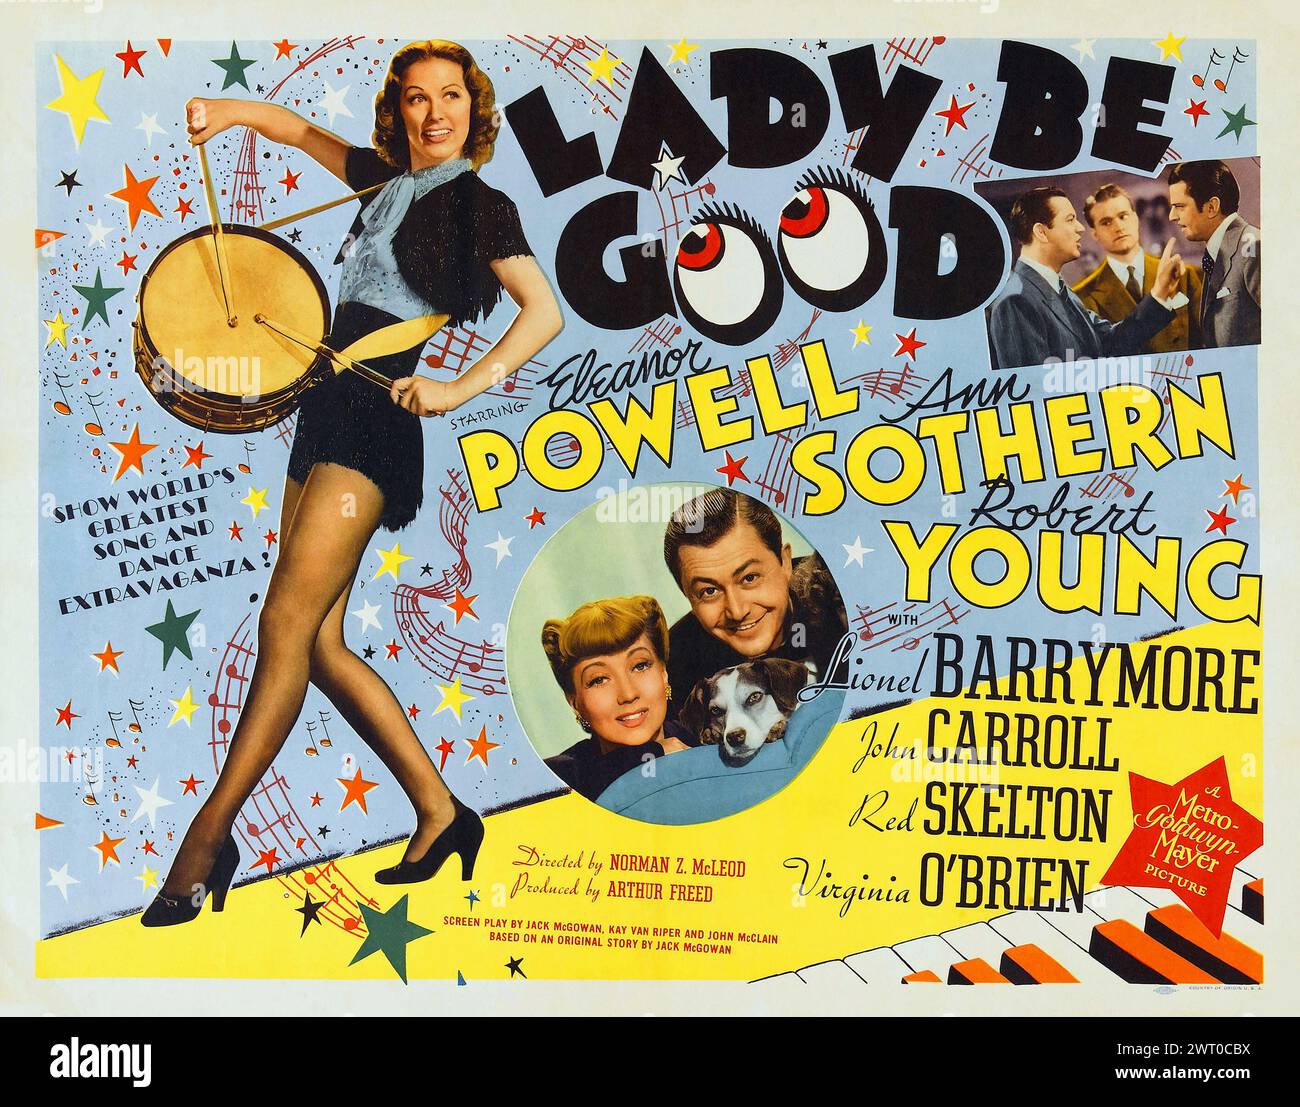 Poster cinematografico vintage per il film MGM del 1941 Lady Be Good - Eleanor Powell, Ann Sothern, Robert Young Foto Stock